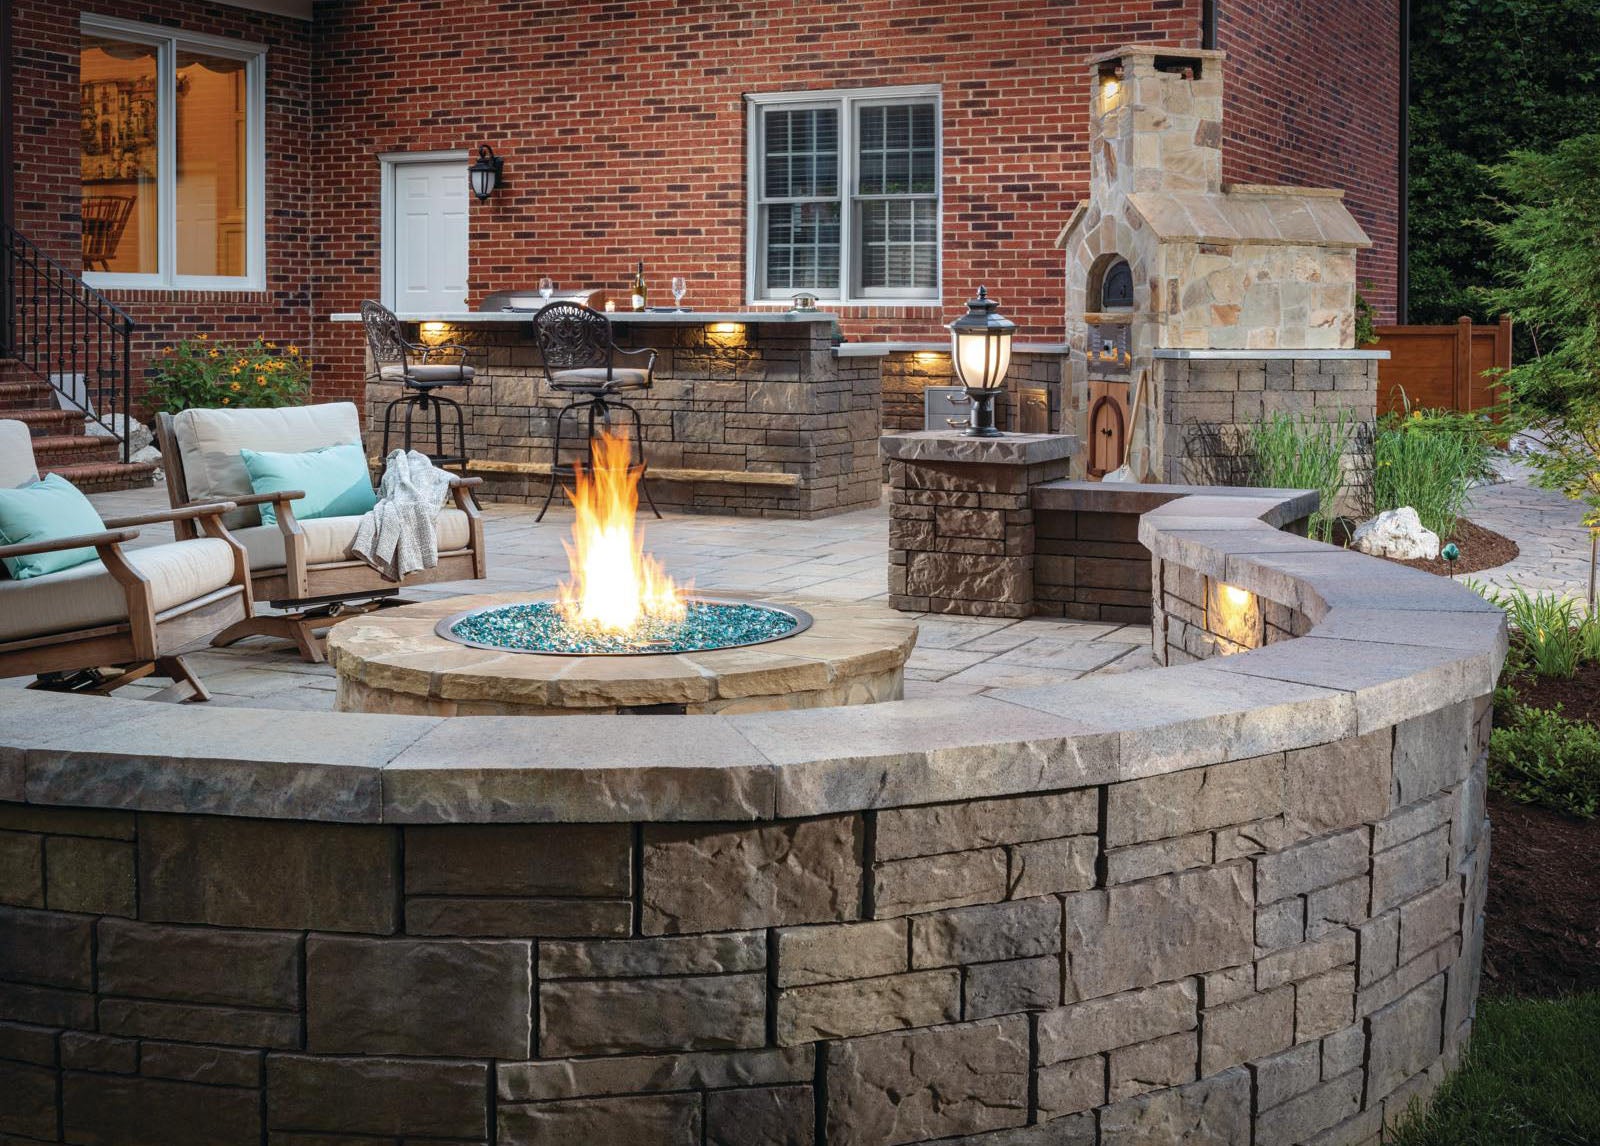 Designing A Patio Around Fire Pit, Brick Fire Pit Images